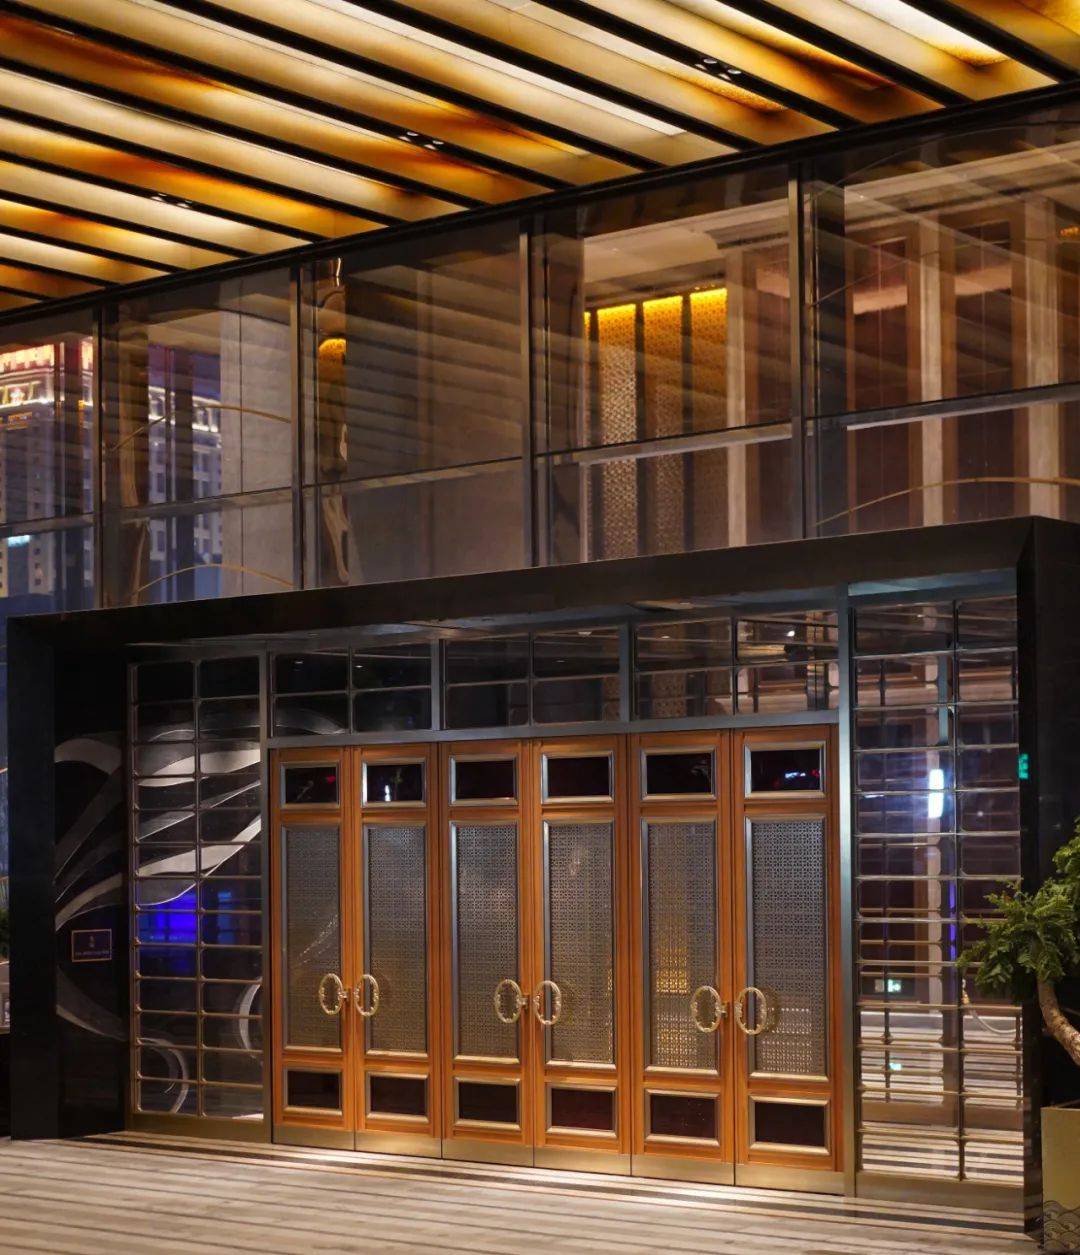 The Ritz-Carlton Hong Kong Review: The Highest Hotel In The World! - US ...